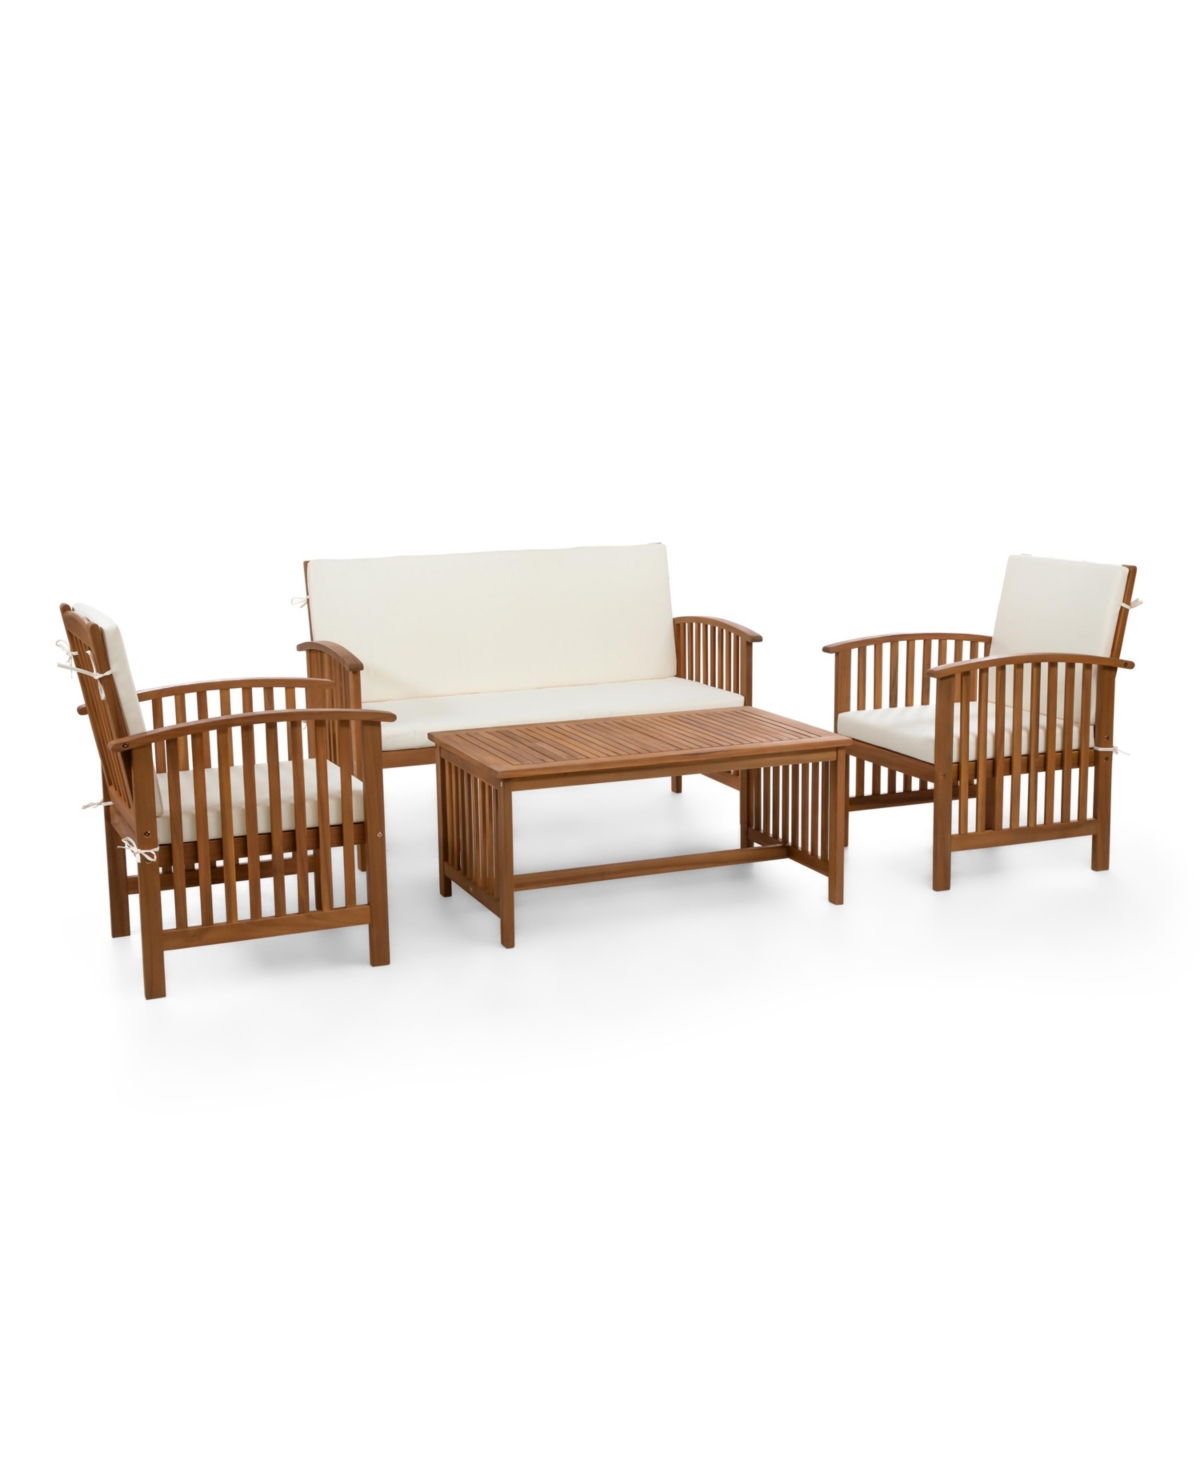 Furniture Of America 4 Piece Acacia Patio Conversation Set With Removable Cushions In Beige